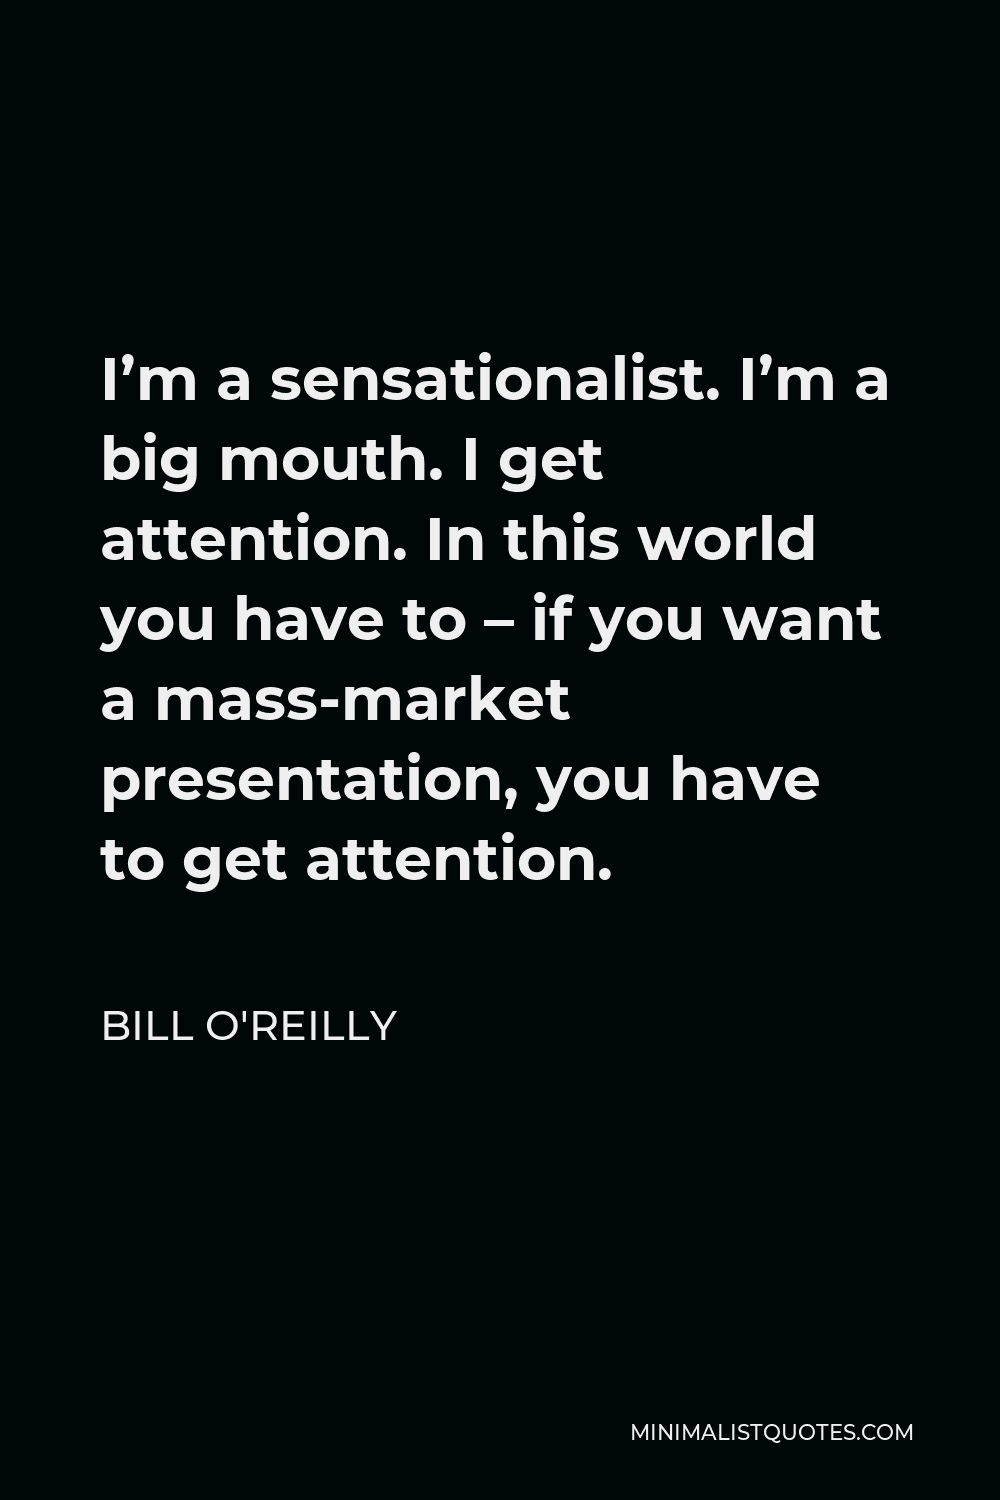 Bill O'Reilly Quote - I’m a sensationalist. I’m a big mouth. I get attention. In this world you have to – if you want a mass-market presentation, you have to get attention.